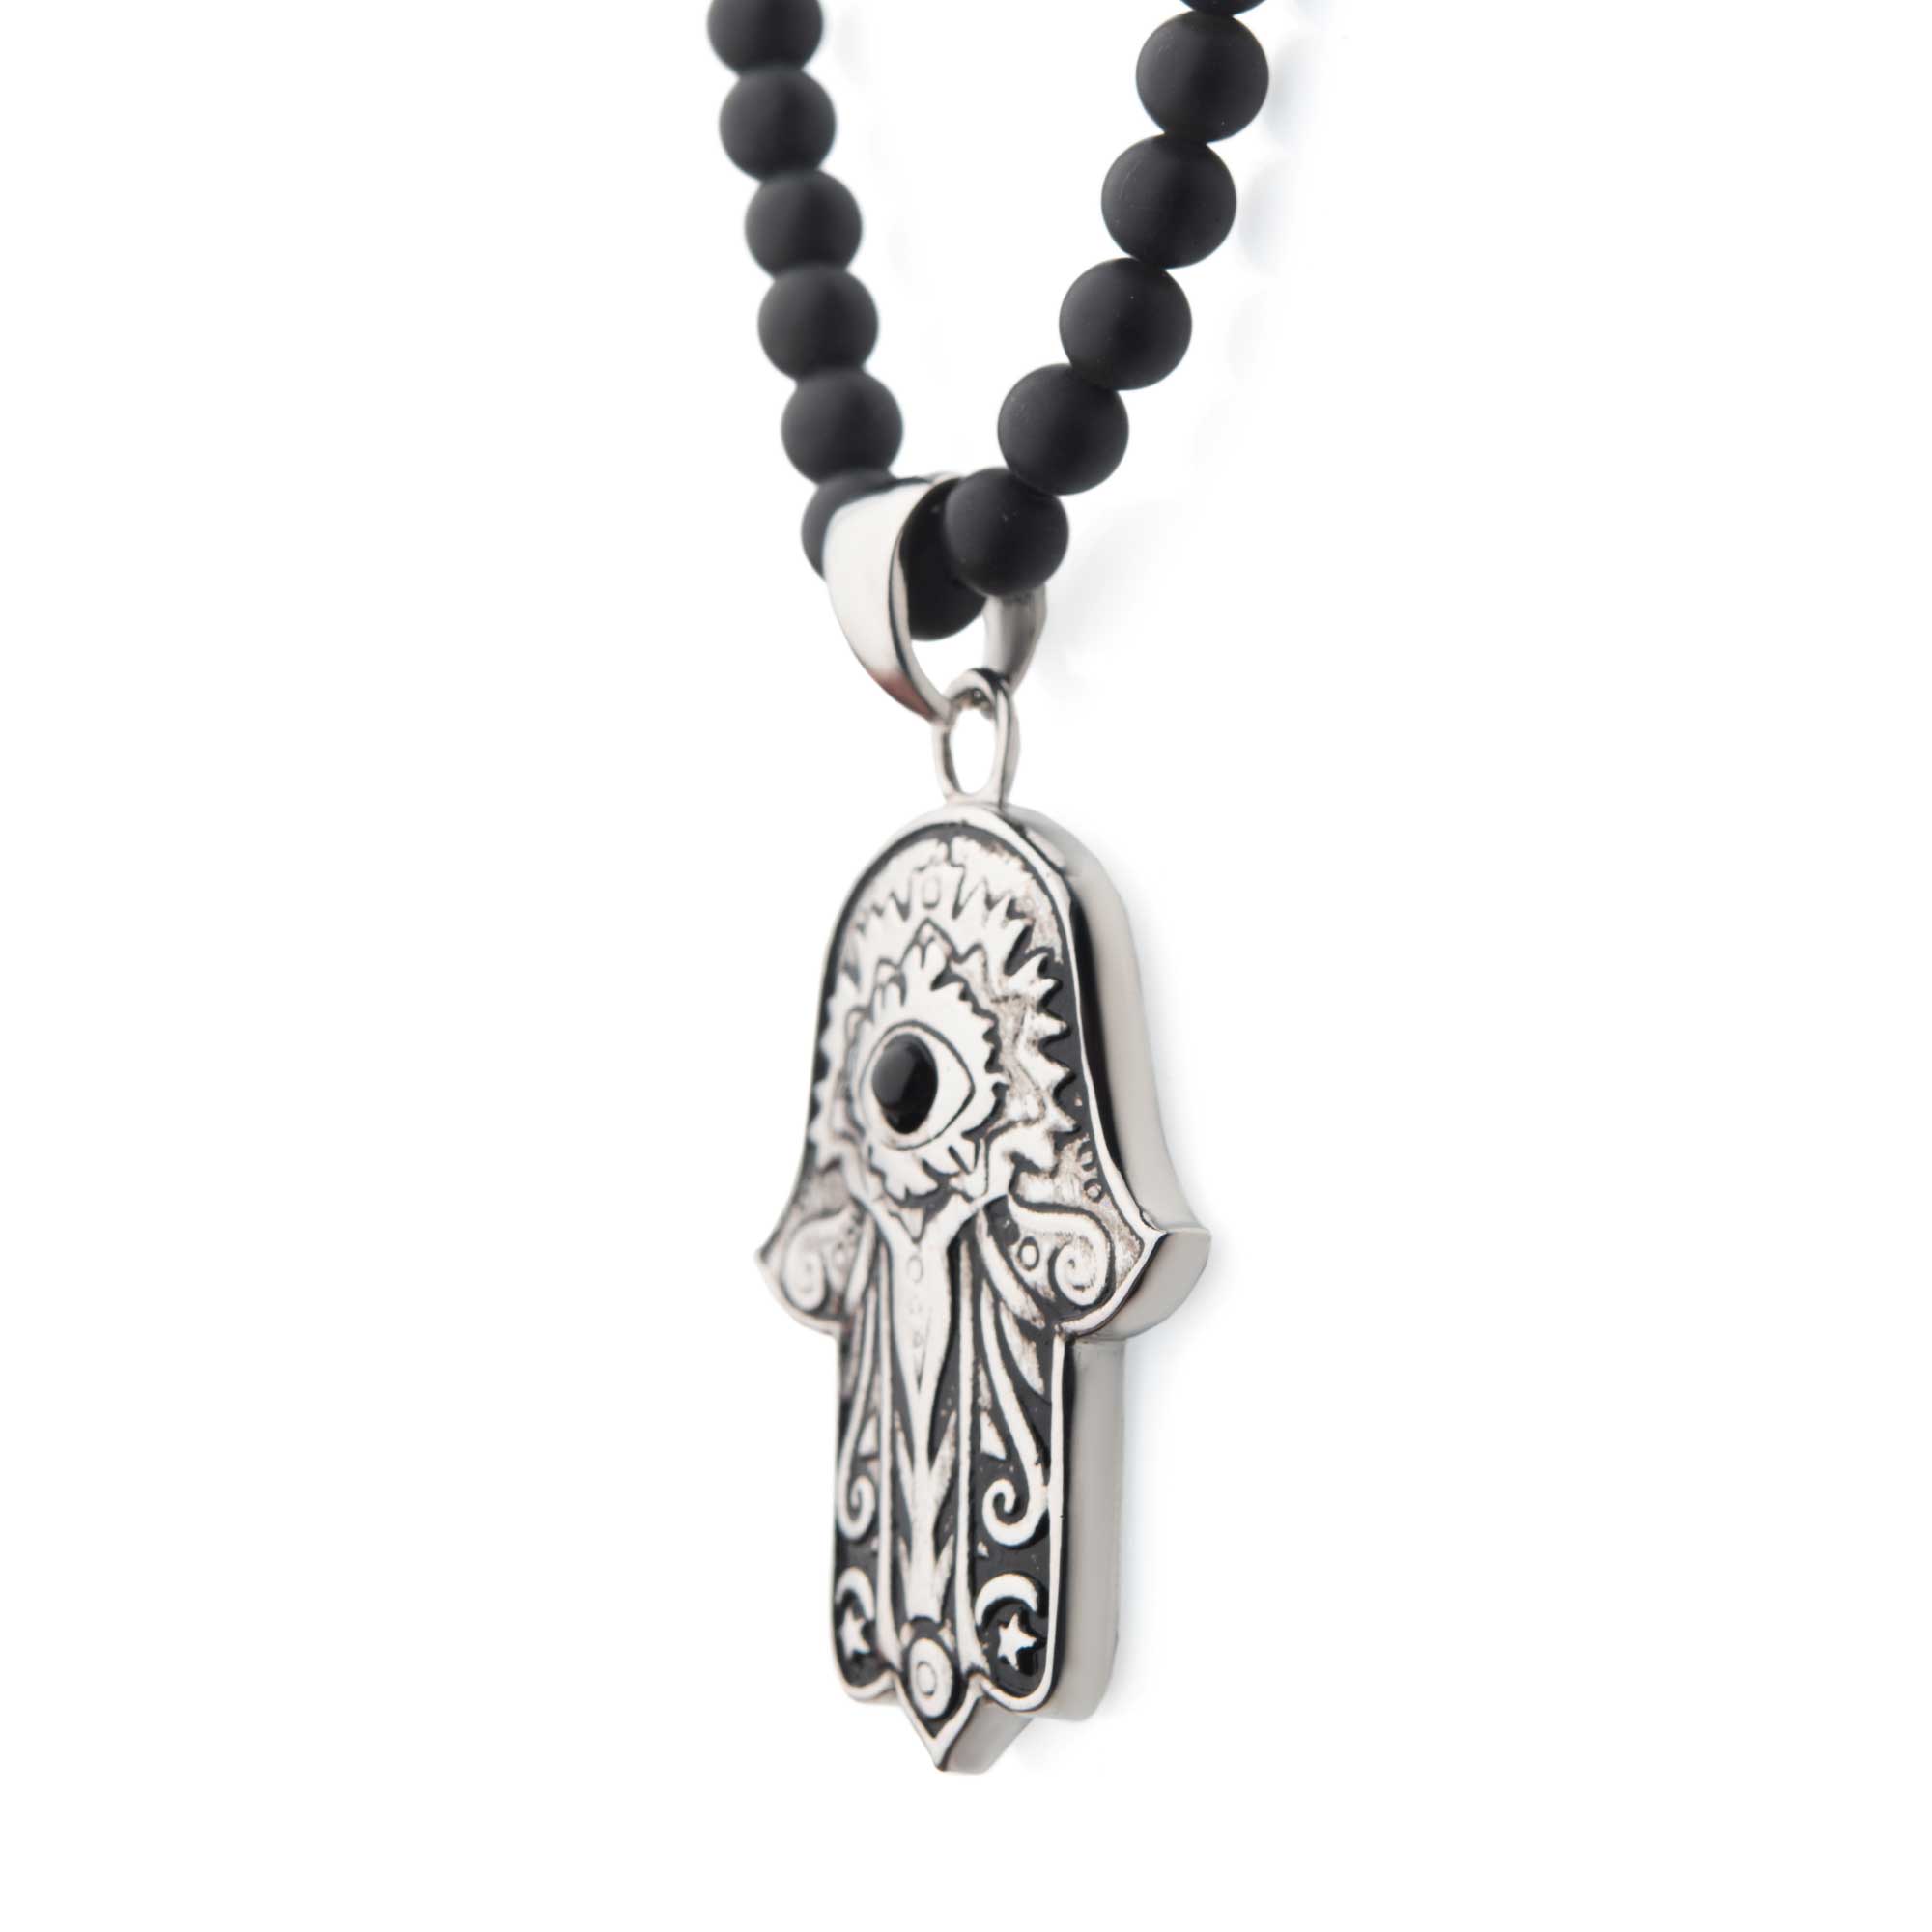 Stainless Steel with Centerpiece Black Agate Stone Hamsa Pendant, with Black Agate Stone Bead Necklace Image 3 K. Martin Jeweler Dodge City, KS